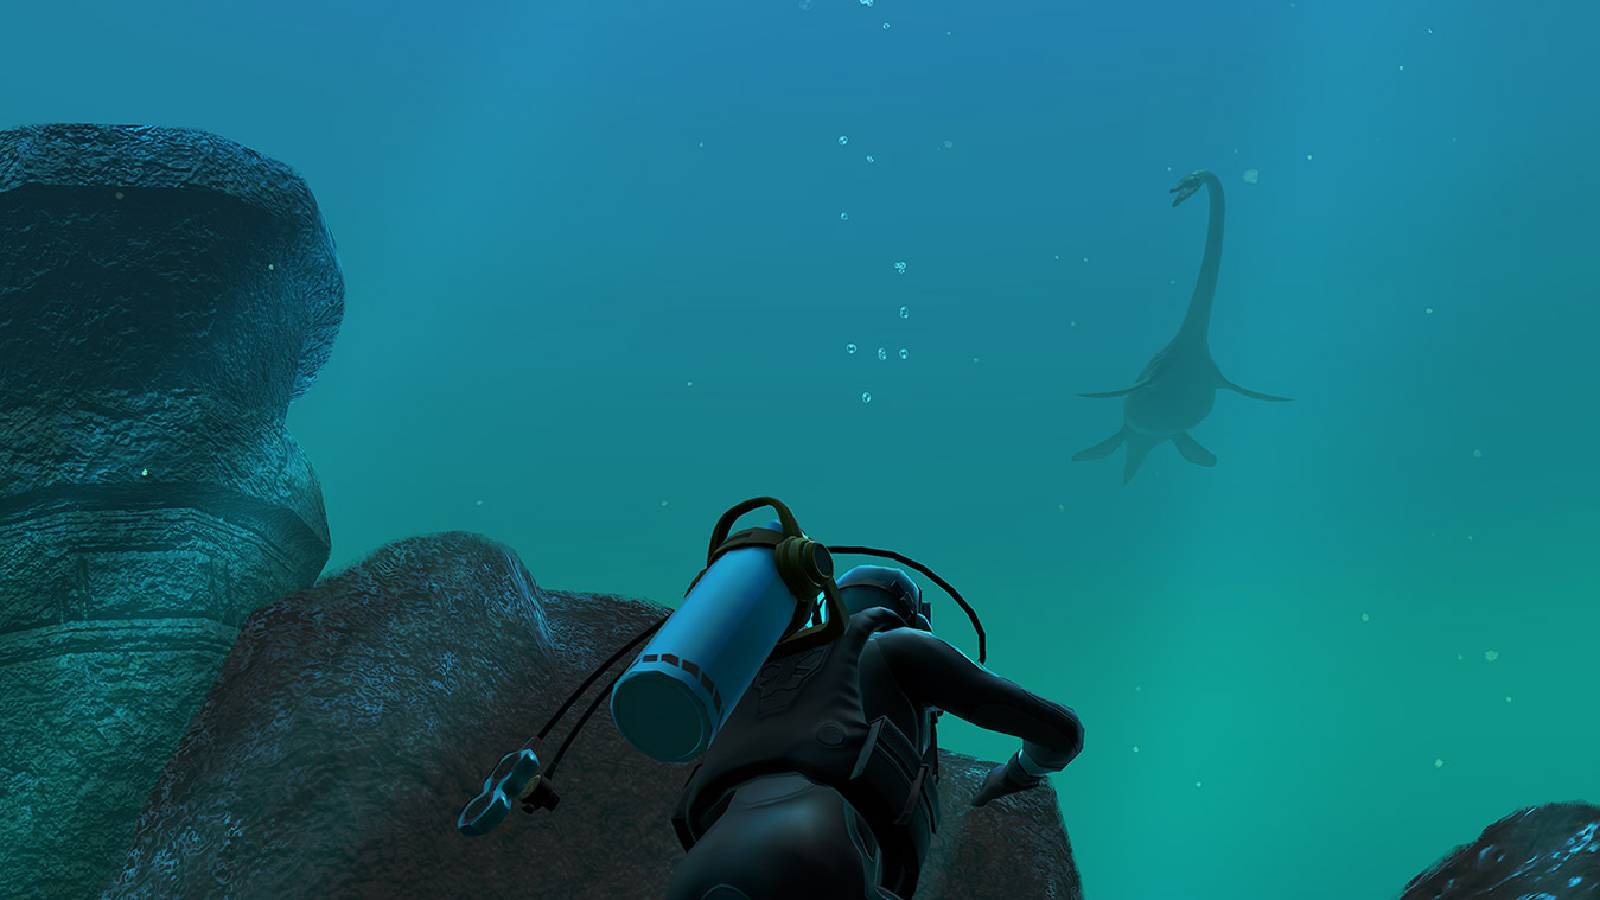 A diver peaks over a rock to look at a plesiosaur